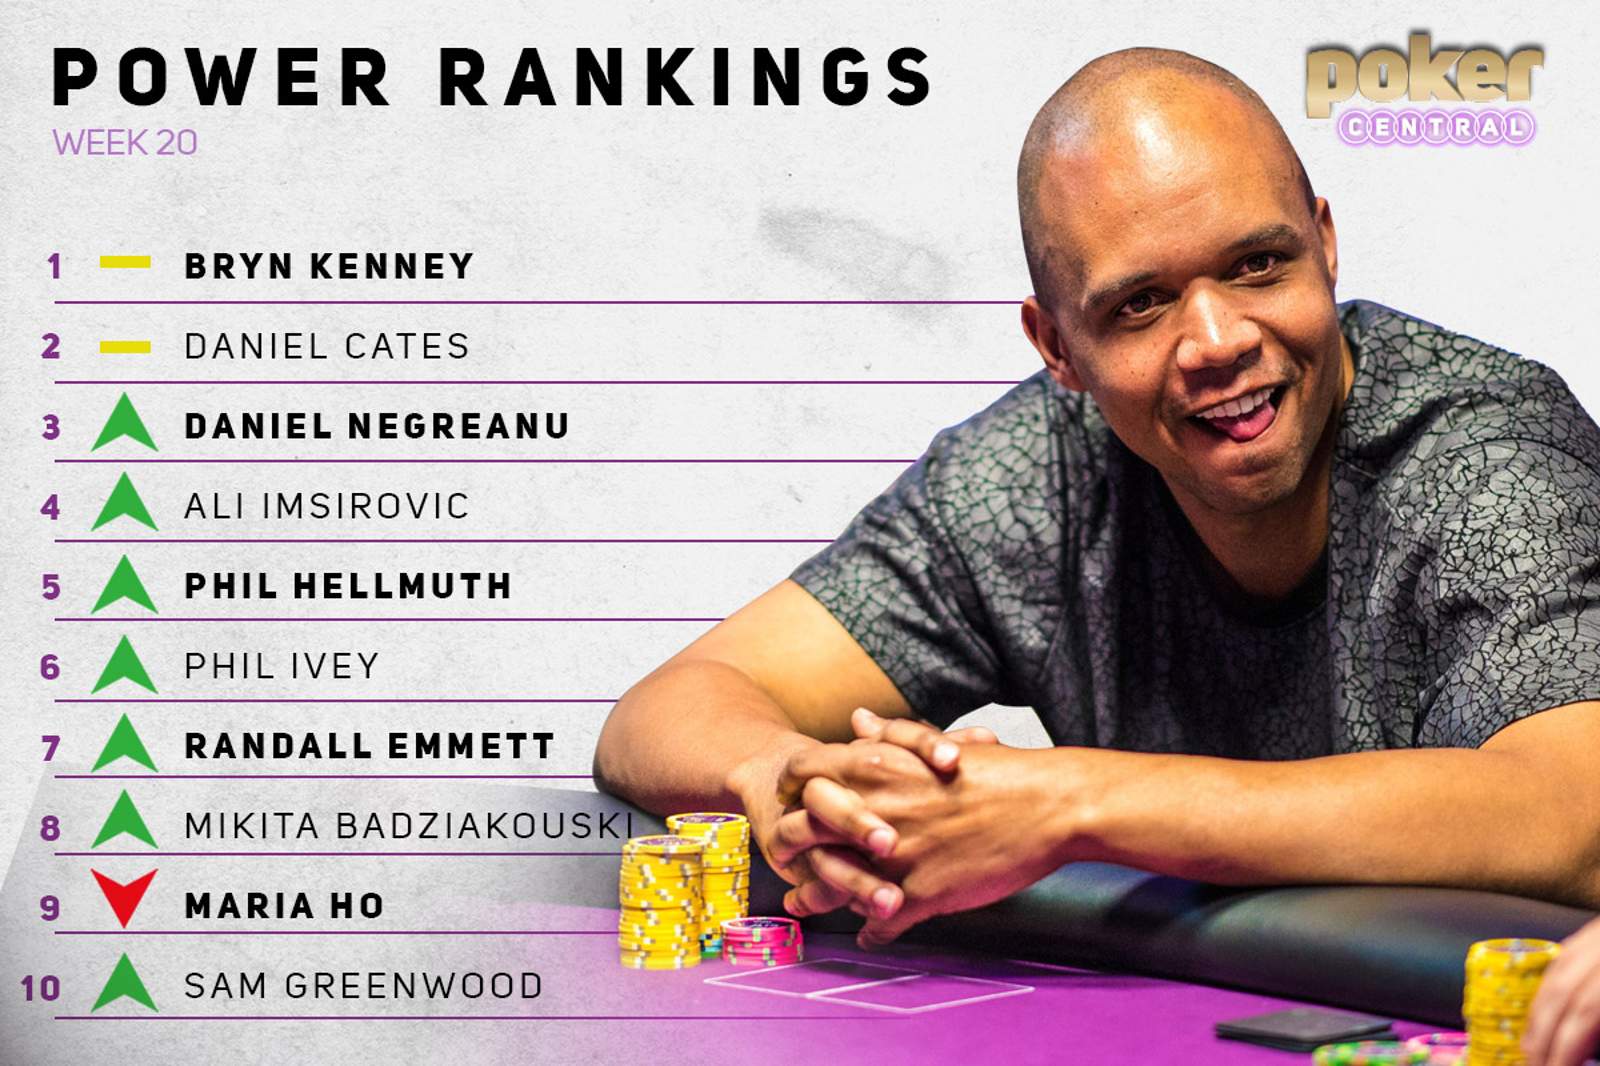 Power Rankings: Phil Ivey Finally Gets Ranked, Big Jumps for Hellmuth, Emmett, and Negreanu